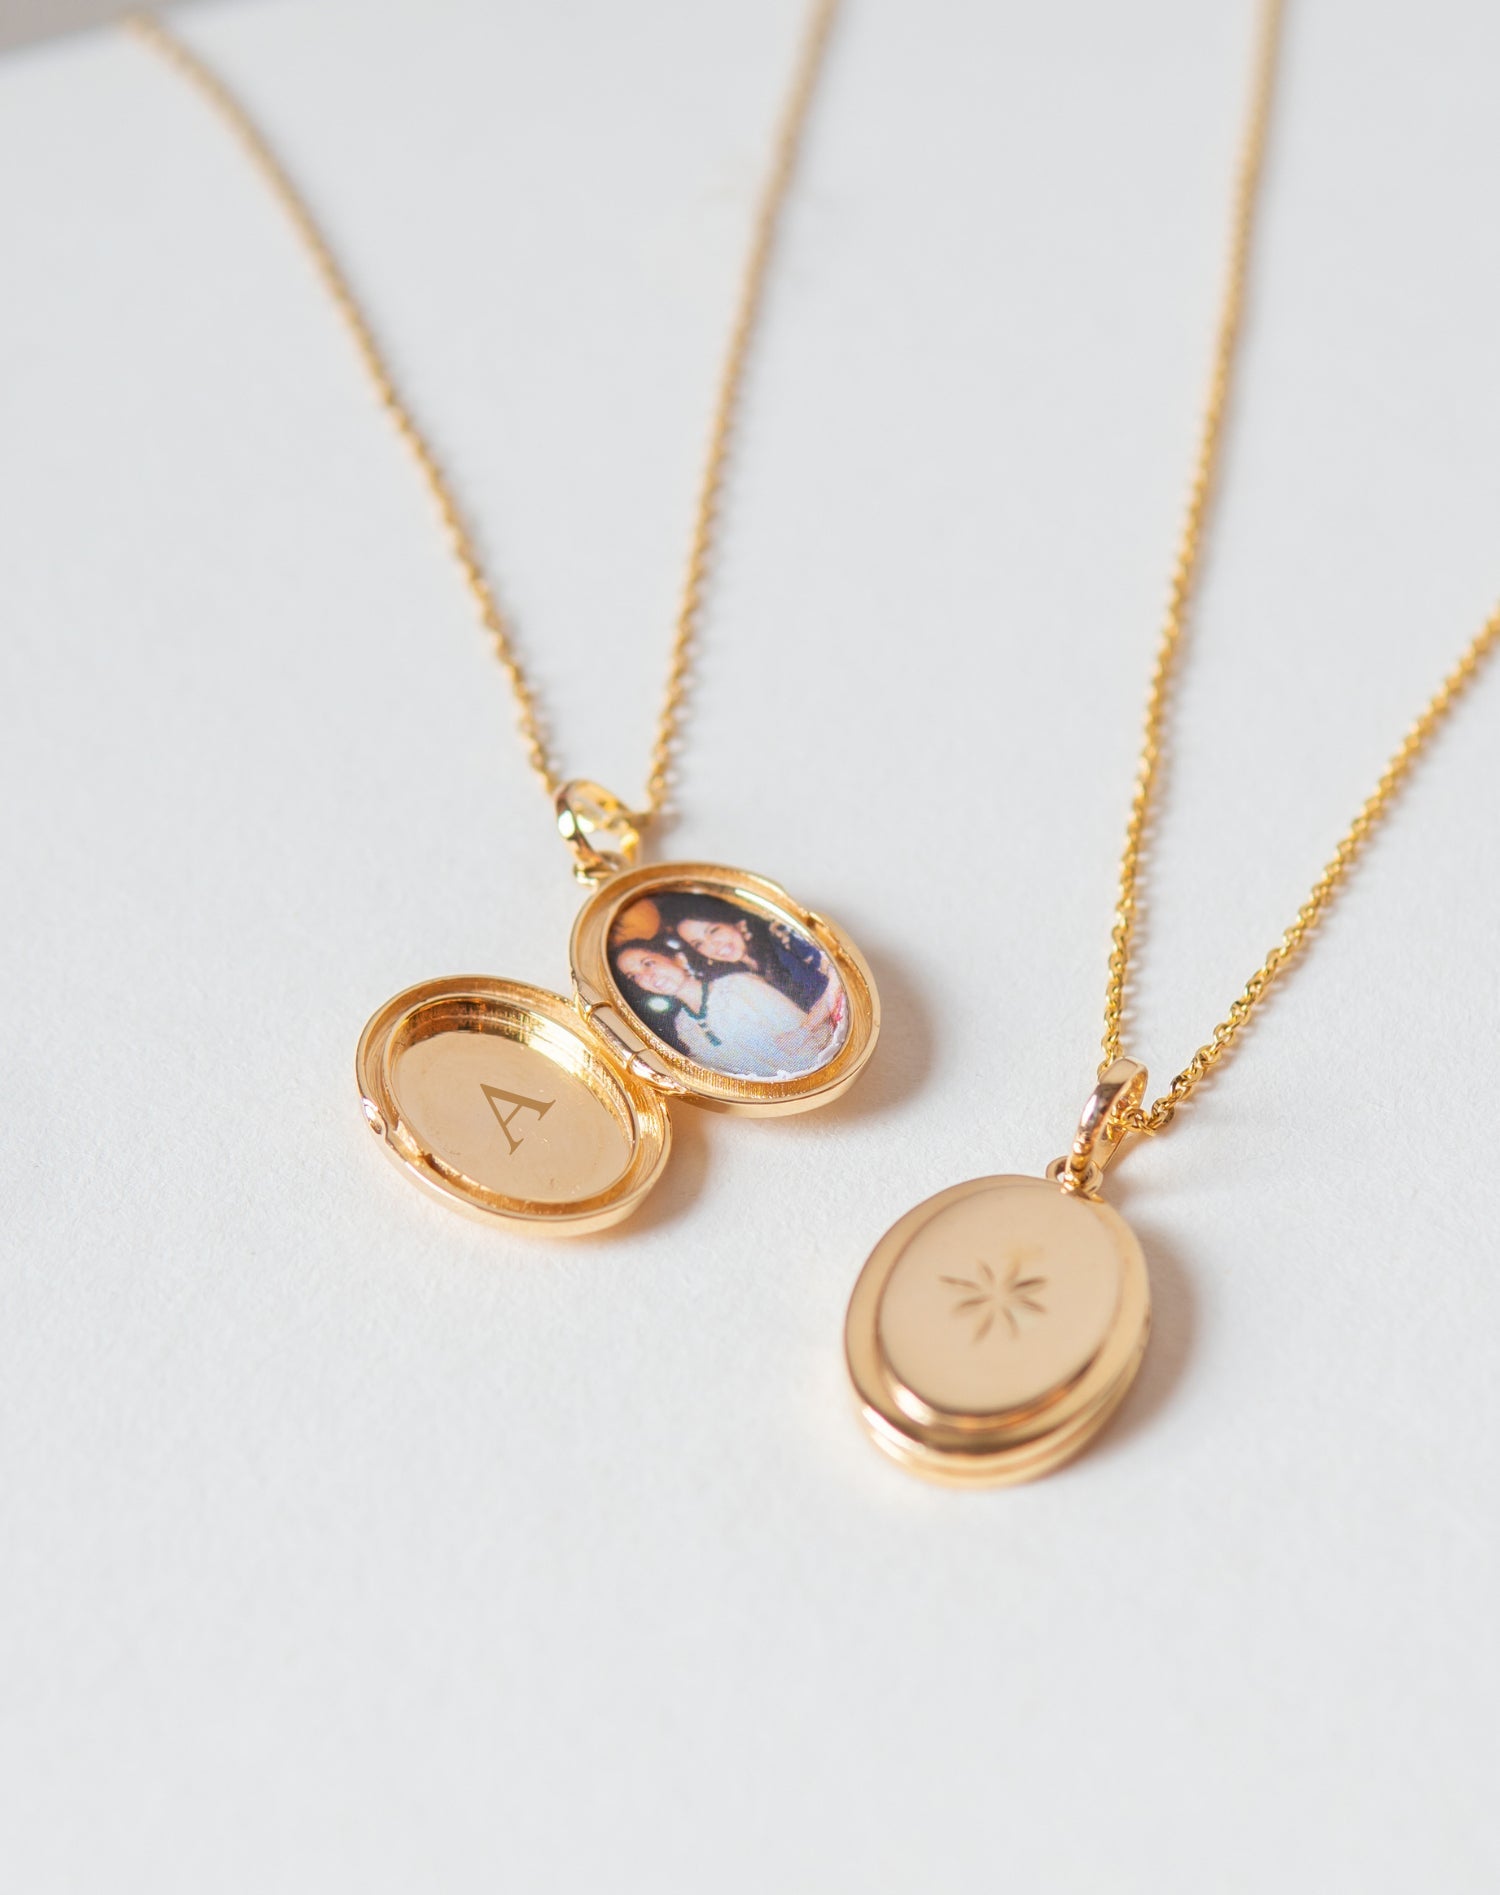 Personalized Engraved Heart Photo Locket Necklace | Heart locket, Heart locket  necklace, Photo locket necklace